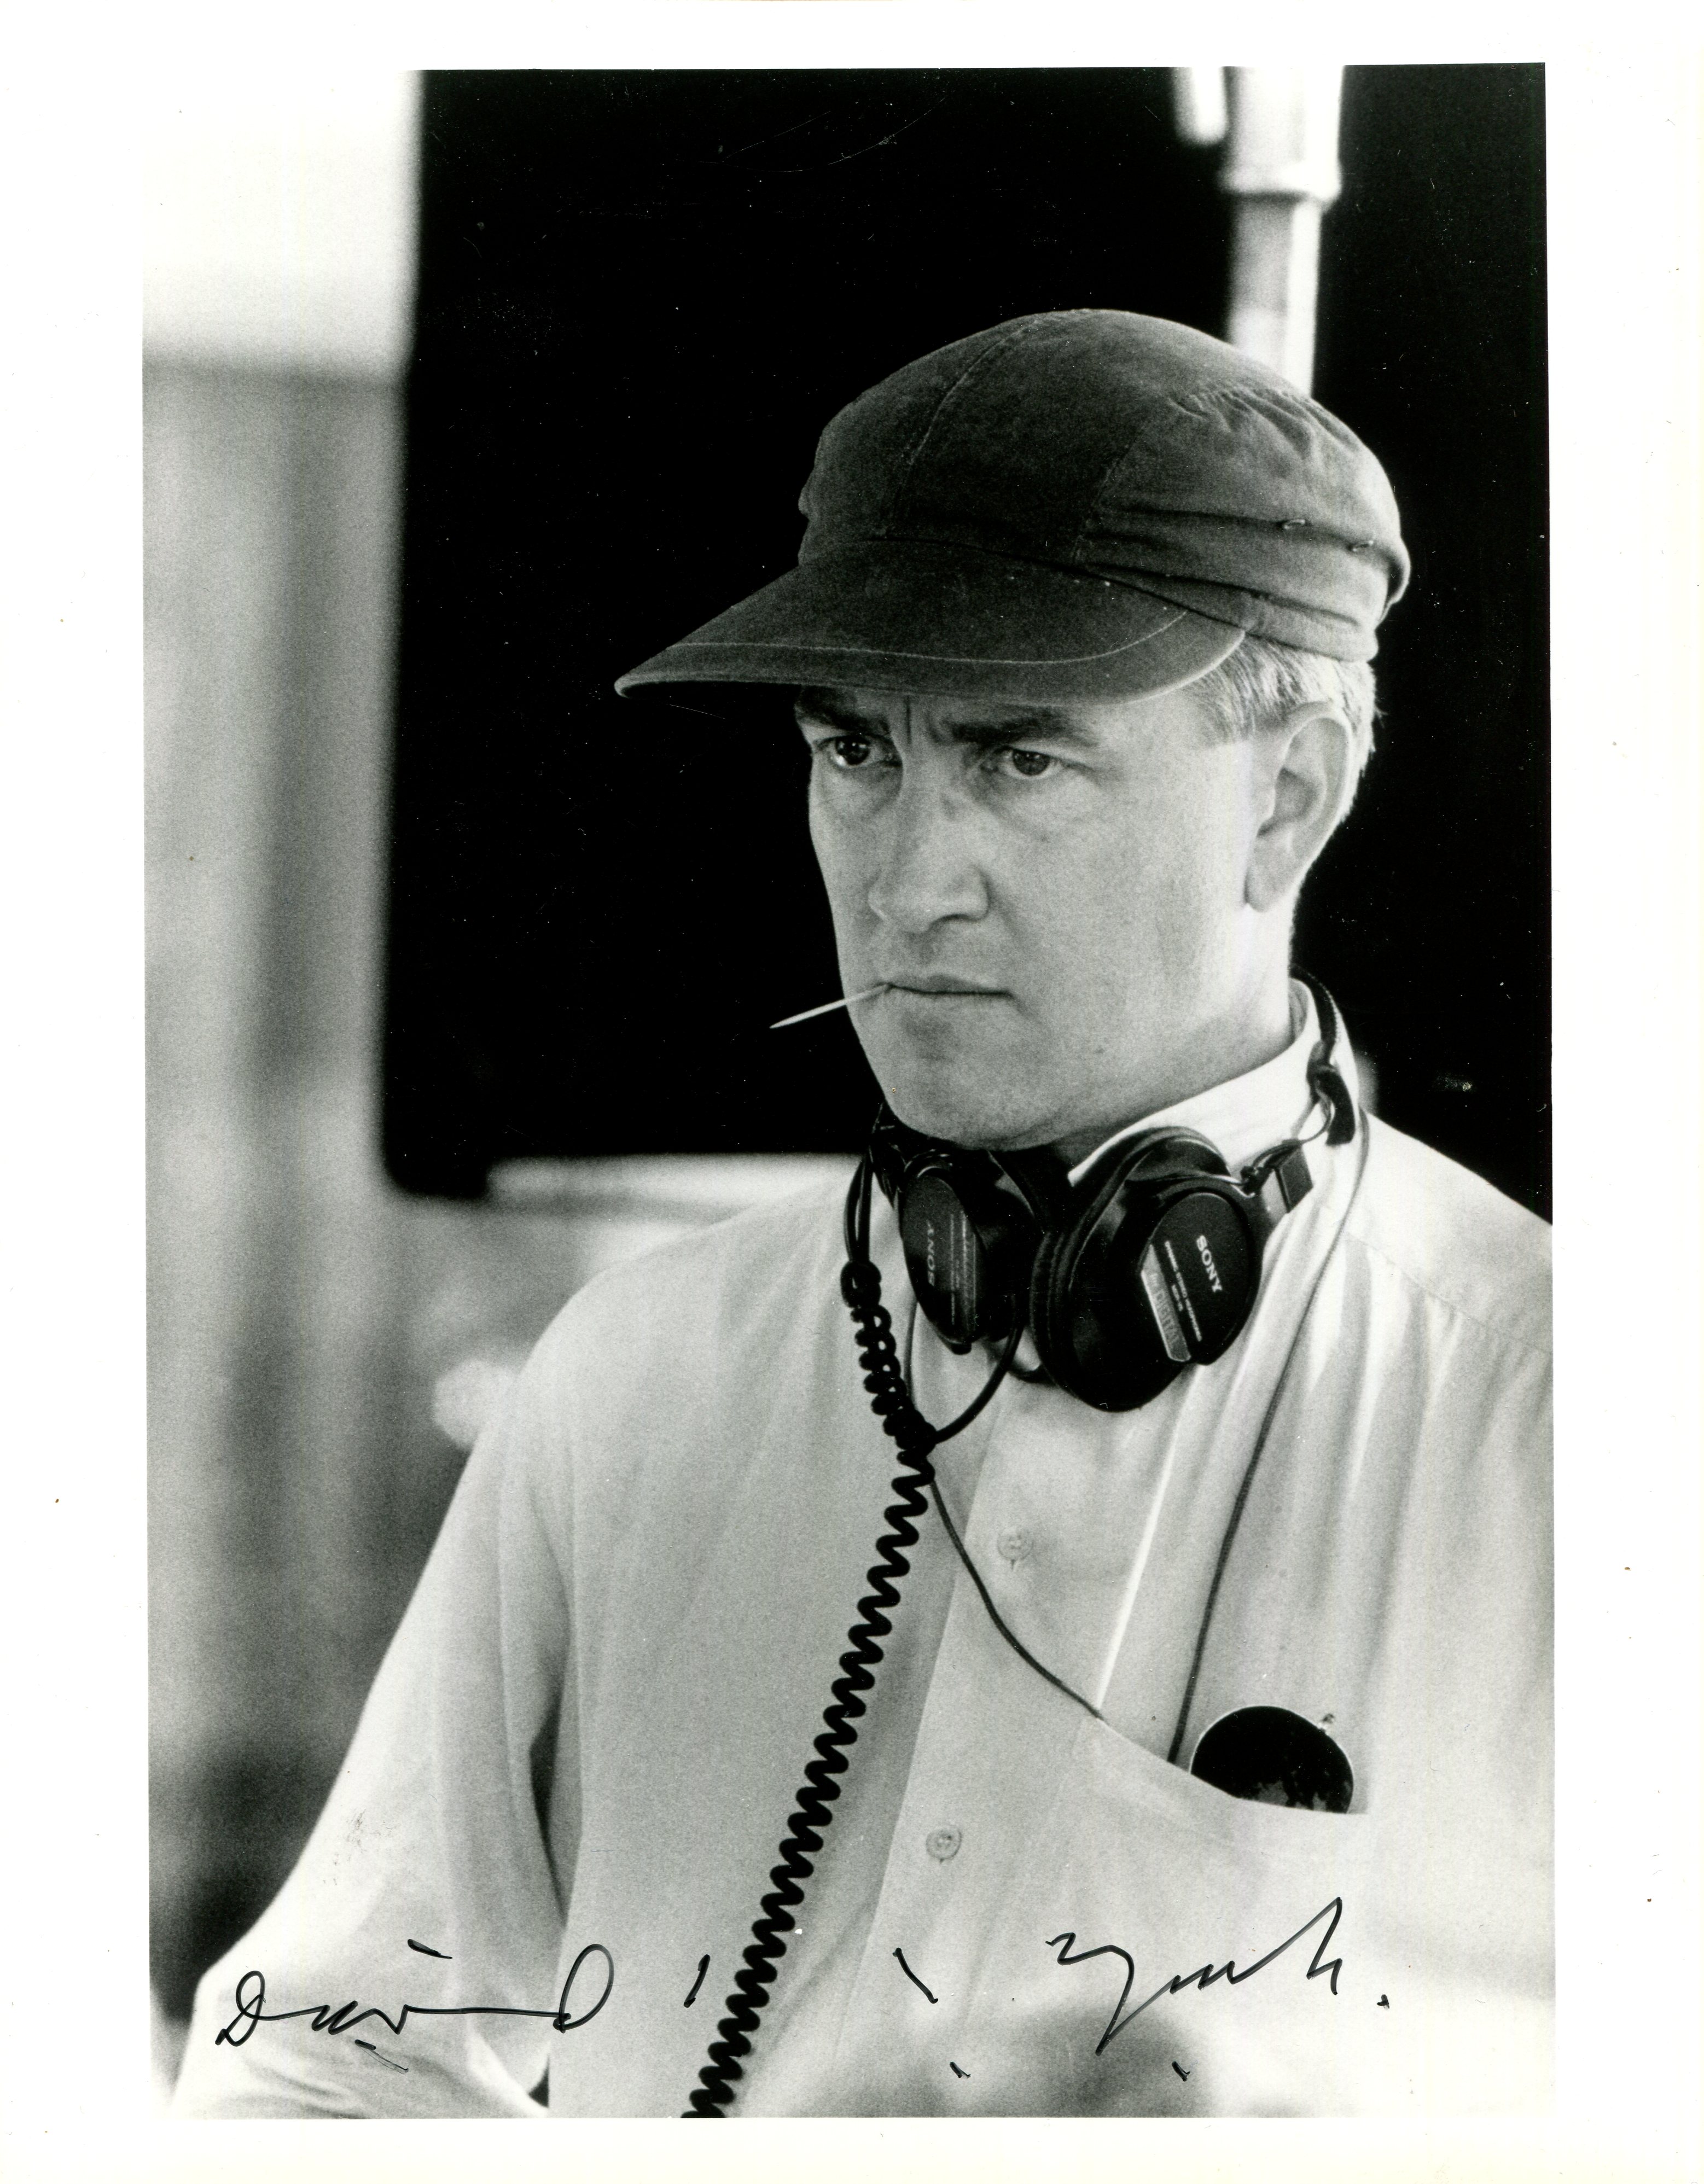 WILD AT HEART: David Lynch (1946- ) American film director. Signed 8 x 10 photograph of Lynch in a